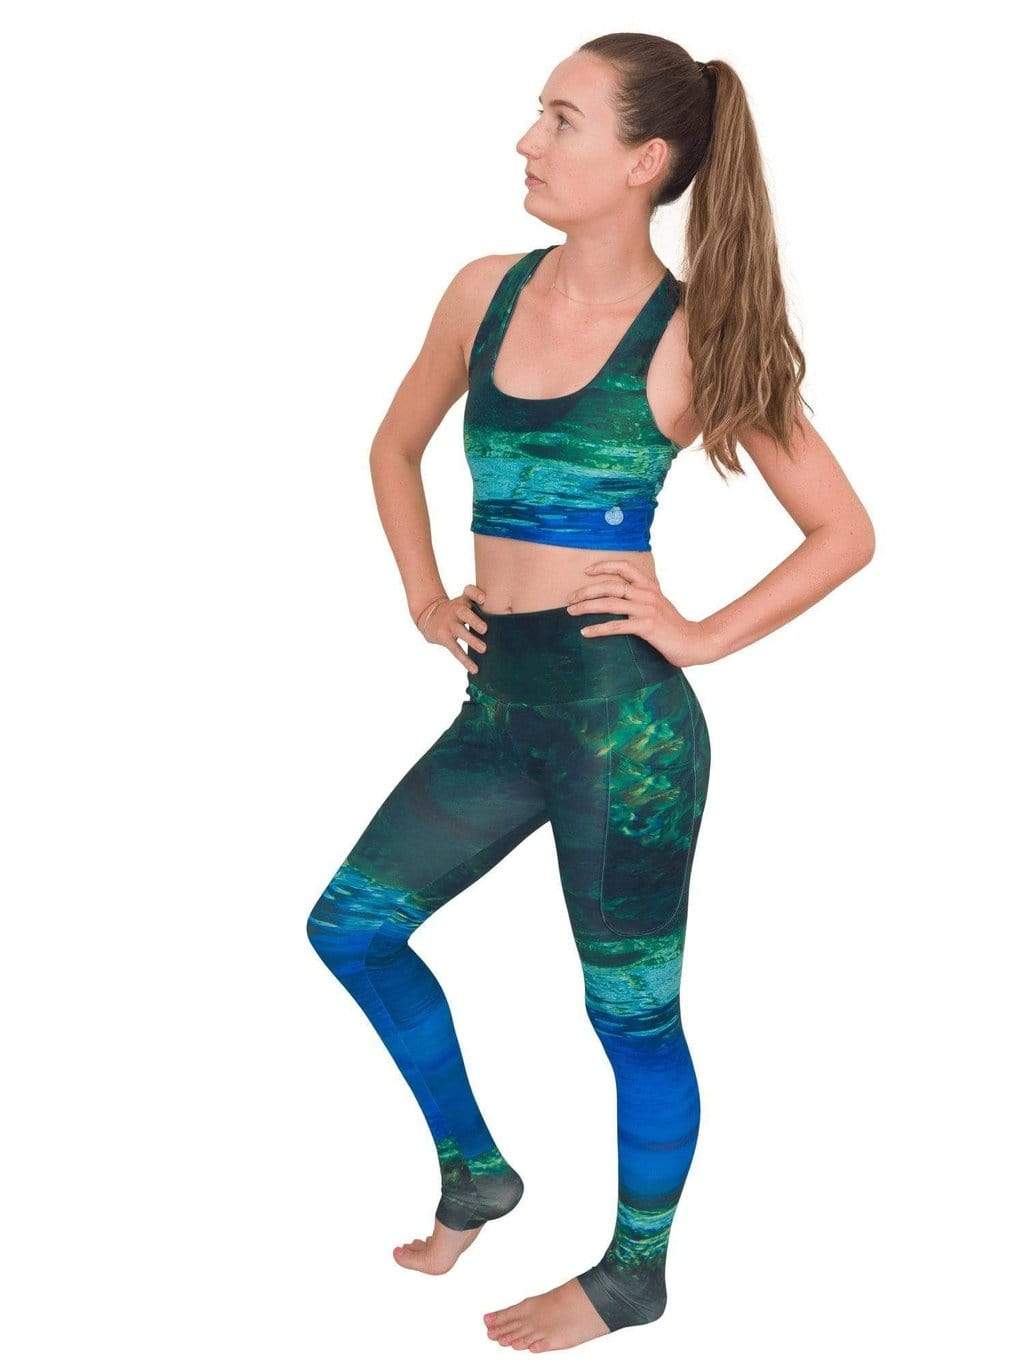 Model: Laura is our Chief Product Officer at Waterlust, a scuba diver, kiter and recreational yogi. She is 5’10, 147 lbs, 34B and is wearing a S top and M legging.